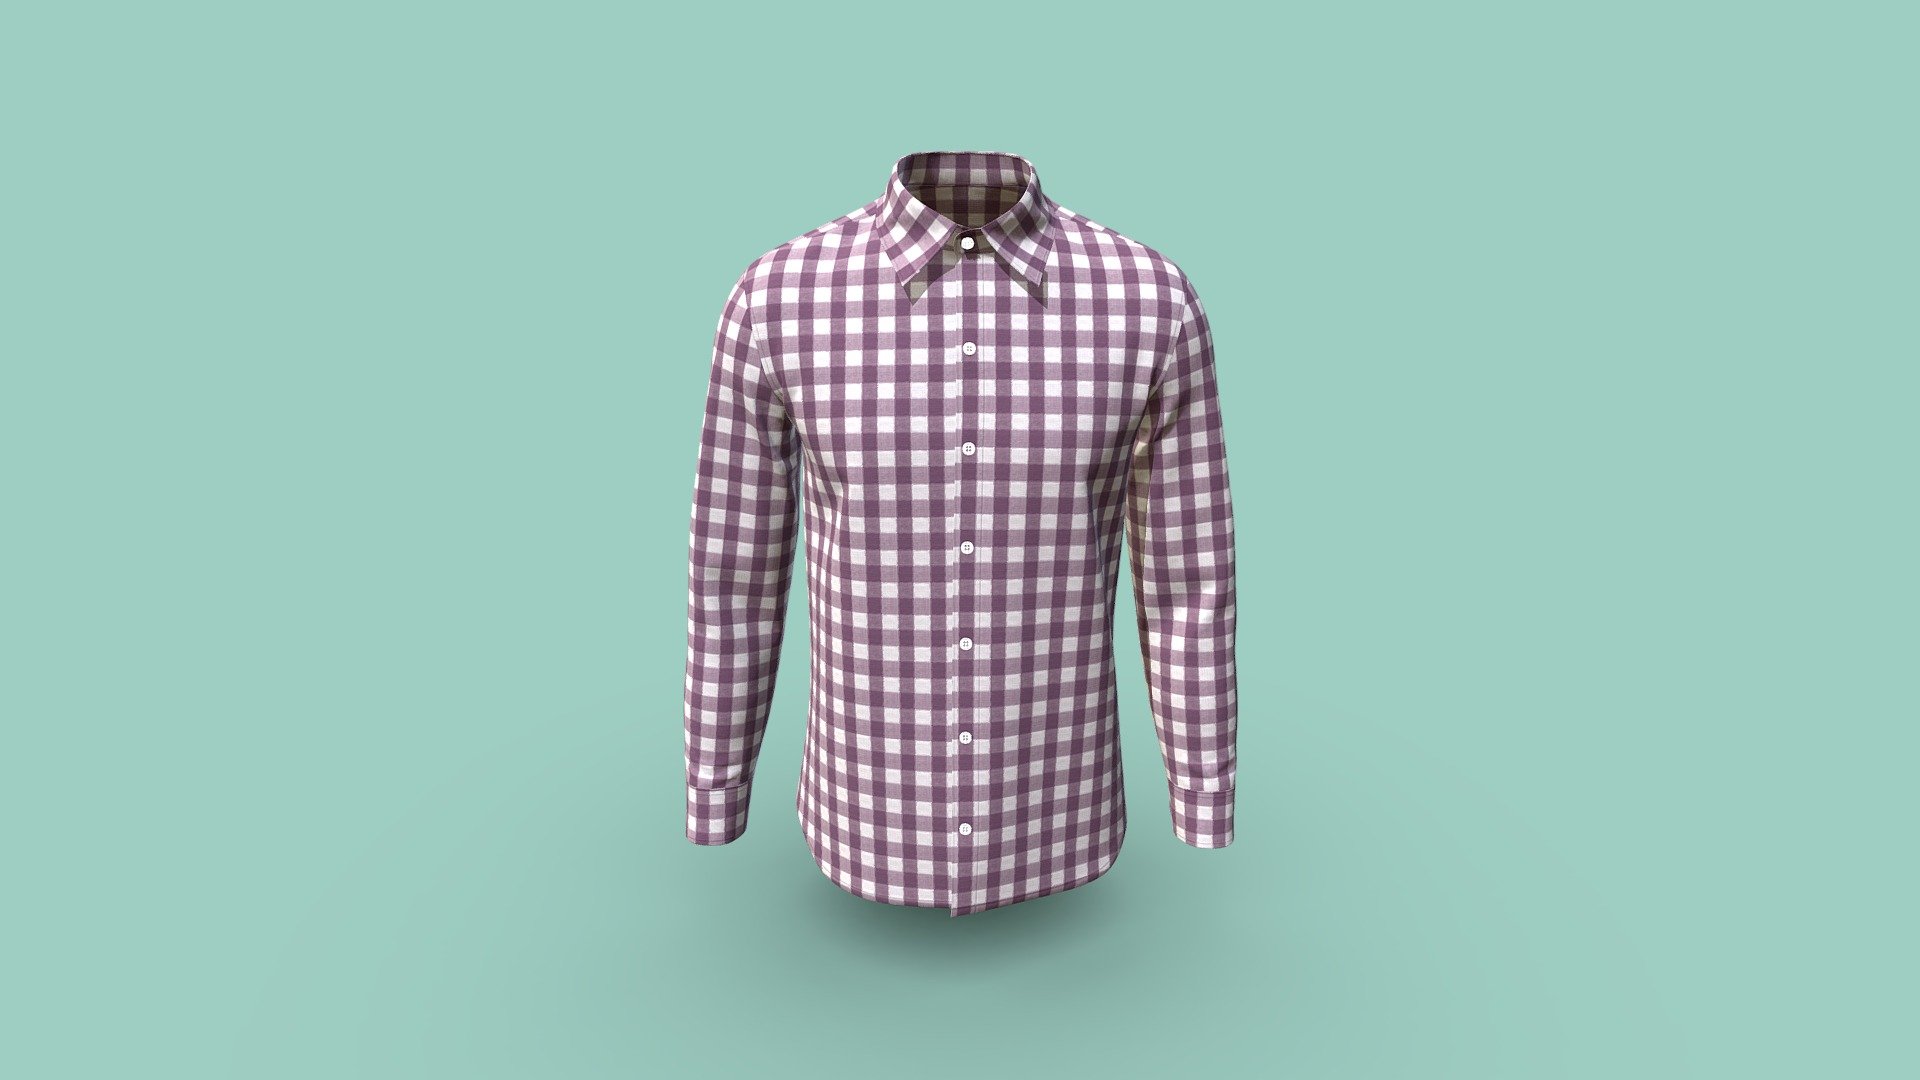 Cloth Title = Basic Check Shirt 

SKU = DG100072 

Category = Men 

Product Type = Shirt 

Cloth Length = Regular 

Body Fit = Slim Fit 

Occasion = Casual  

Sleeve Style = Long Sleeve 


Our Services: 

3D Apparel Design. 

OBJ,FBX,GLTF Making with High/Low Poly. 

Fabric Digitalization. 

Mockup making. 

3D Teck Pack. 

Pattern Making. 

2D Illustration. 

Cloth Animation and 360 Spin Video. 


Contact us:- 

Email: info@digitalfashionwear.com 

Website: https://digitalfashionwear.com 

WhatsApp No: +8801759350445 


We designed all the types of cloth specially focused on product visualization, e-commerce, fitting, and production. 

We will design: 

T-shirts 

Polo shirts 

Hoodies 

Sweatshirt 

Jackets 

Shirts 

TankTops 

Trousers 

Bras 

Underwear 

Blazer 

Aprons 

Leggings 

and All Fashion items. 





Our goal is to make sure what we provide you, meets your demand 3d model